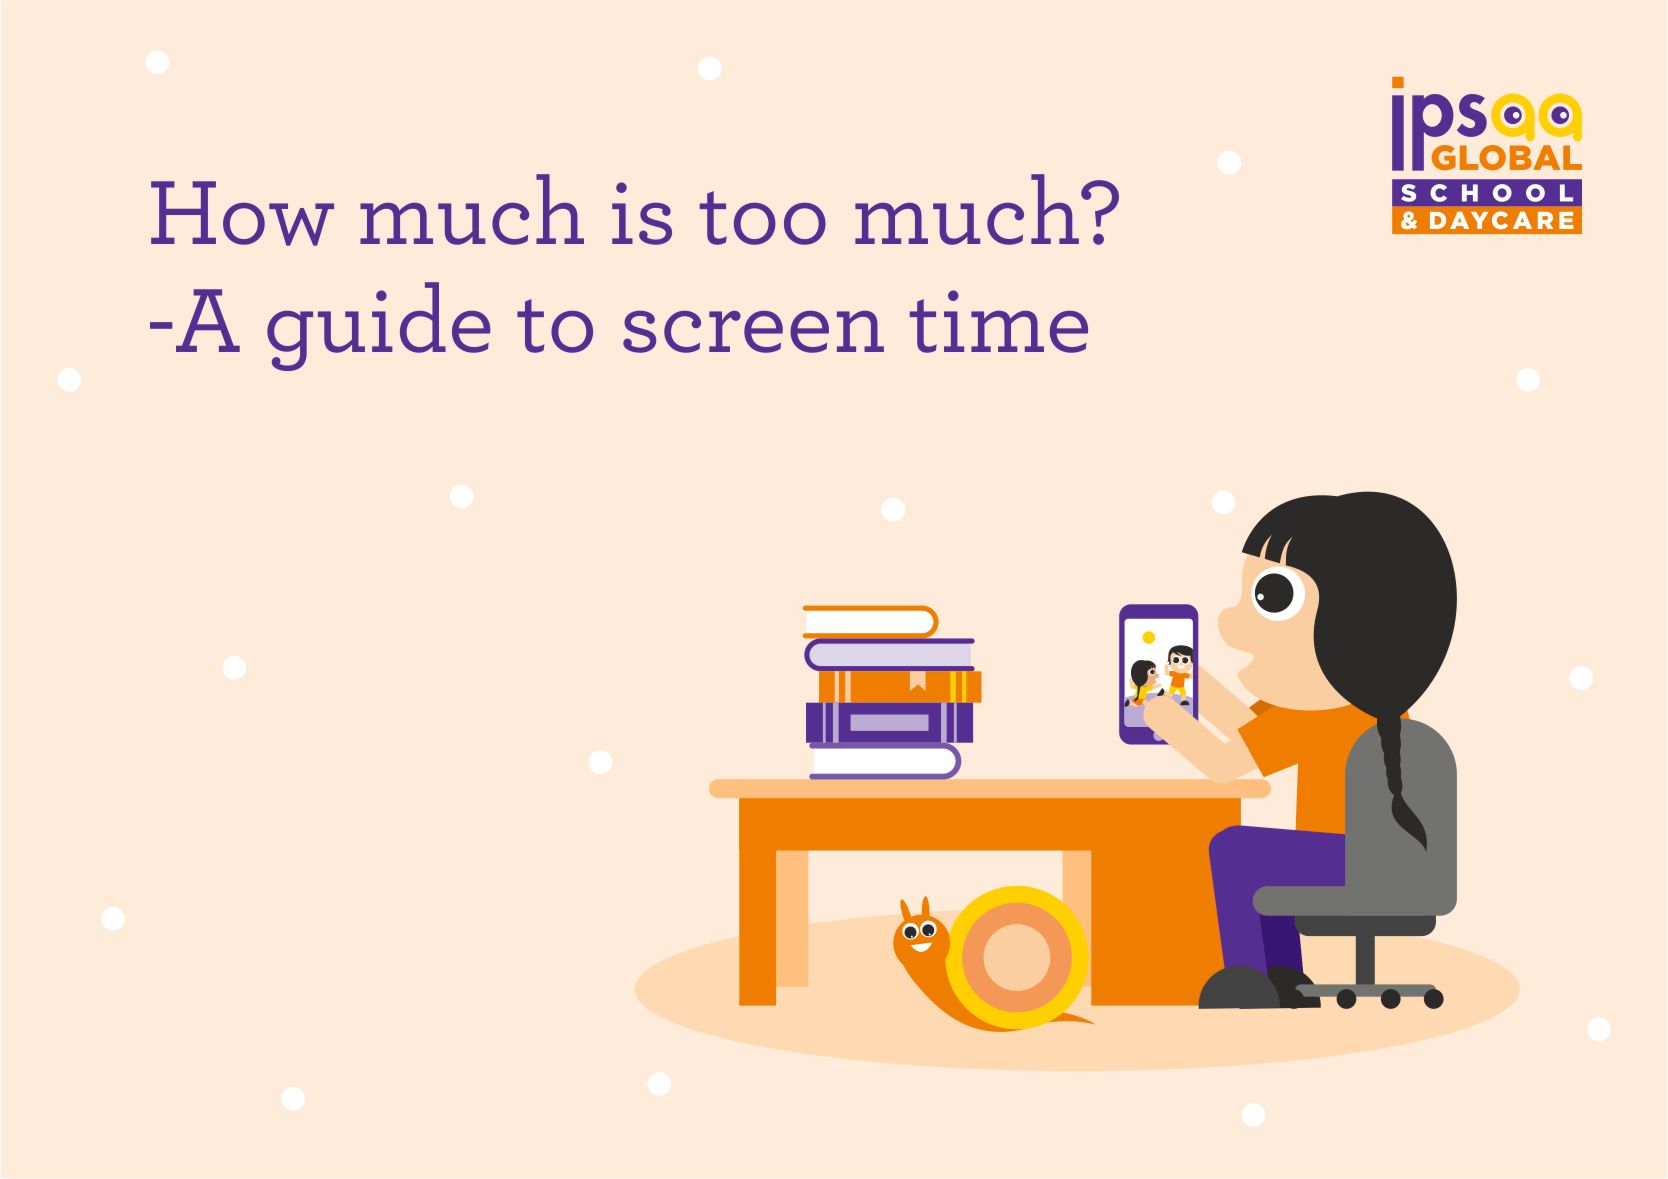 A guide to screen time